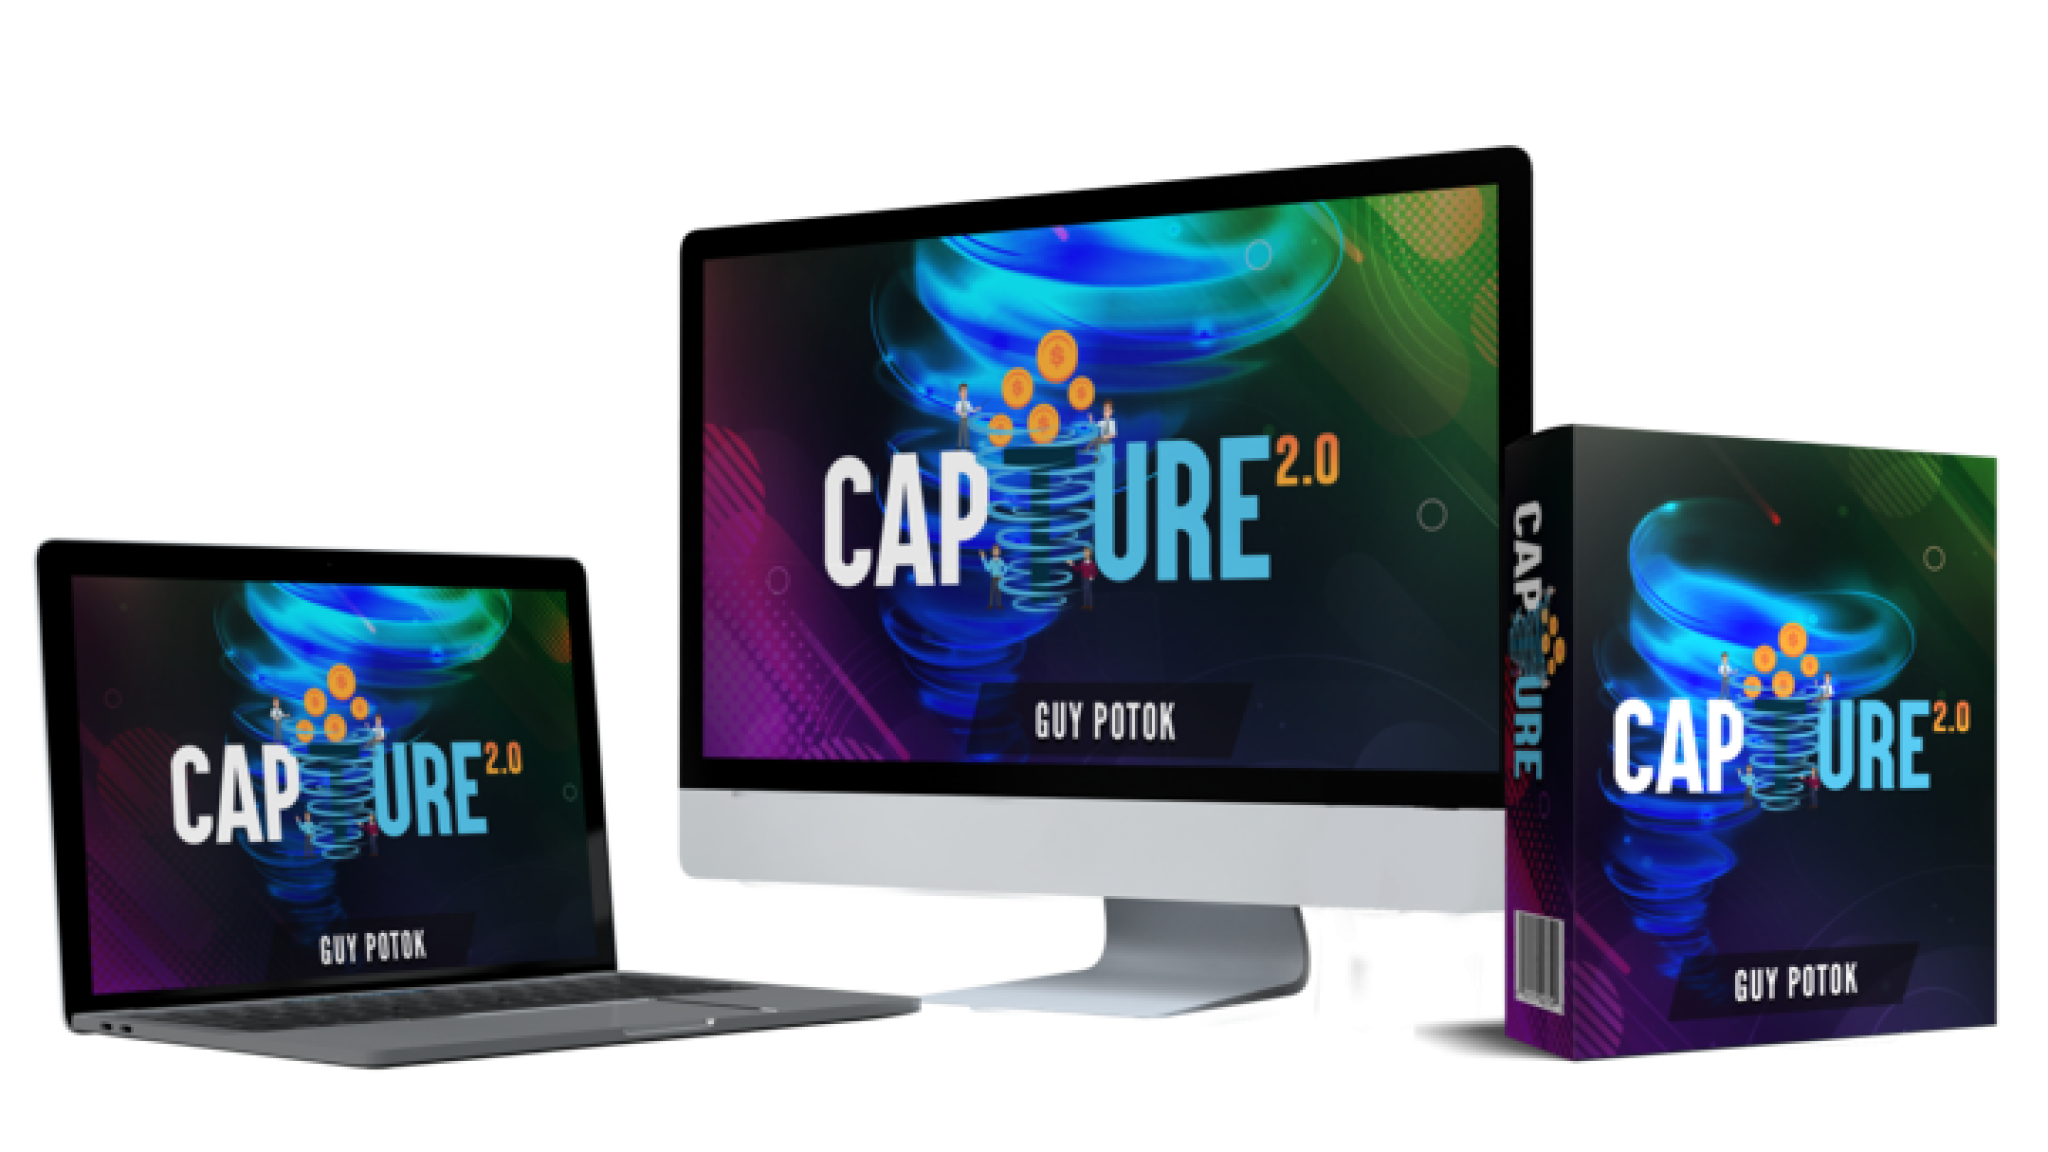 streamCapture2 2.13.3 download the new